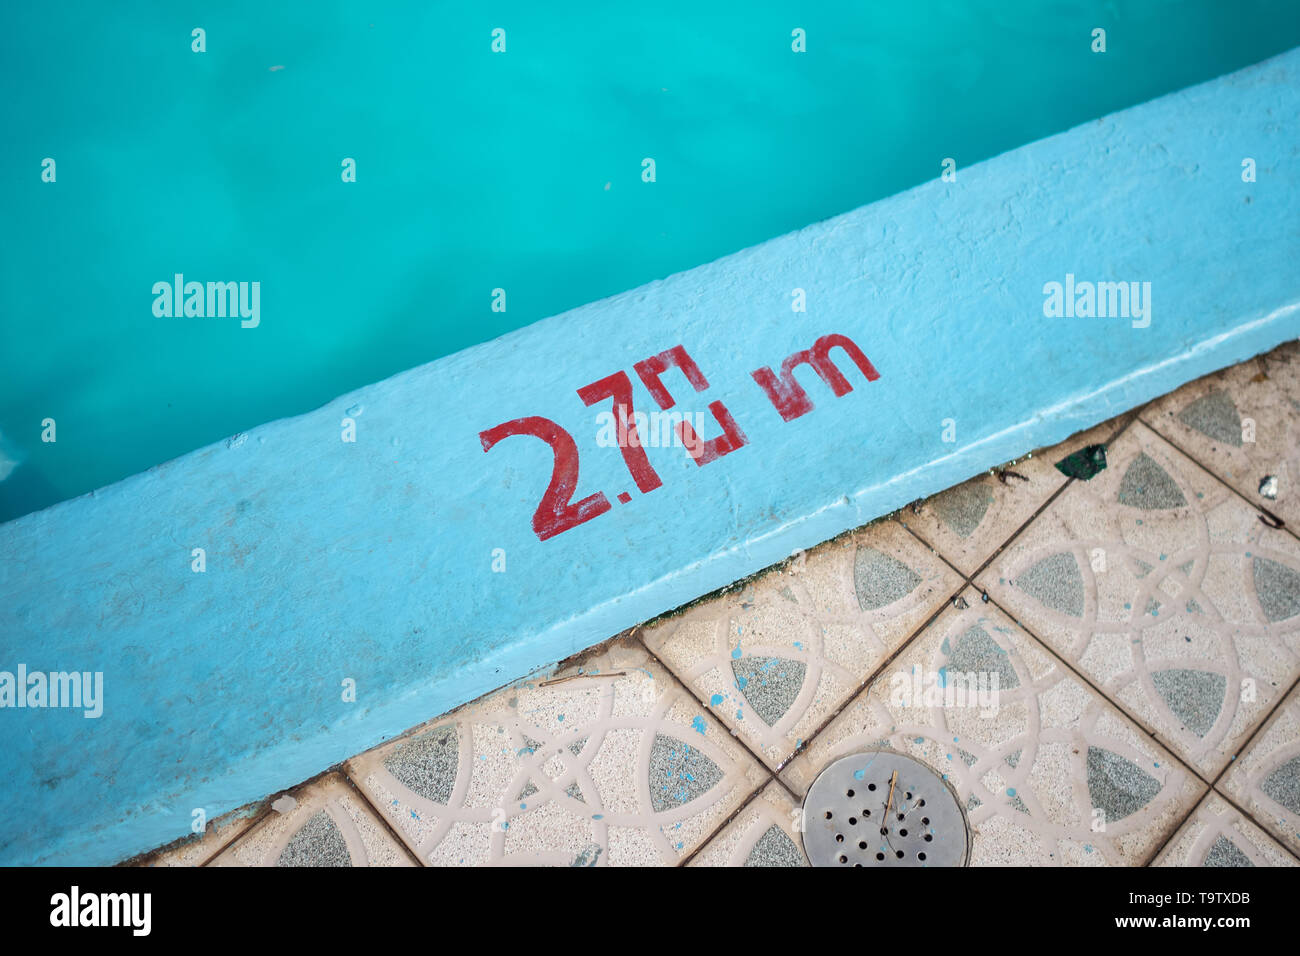 2.70m depth marker painted in red on the side of a blue swimming pool Stock Photo